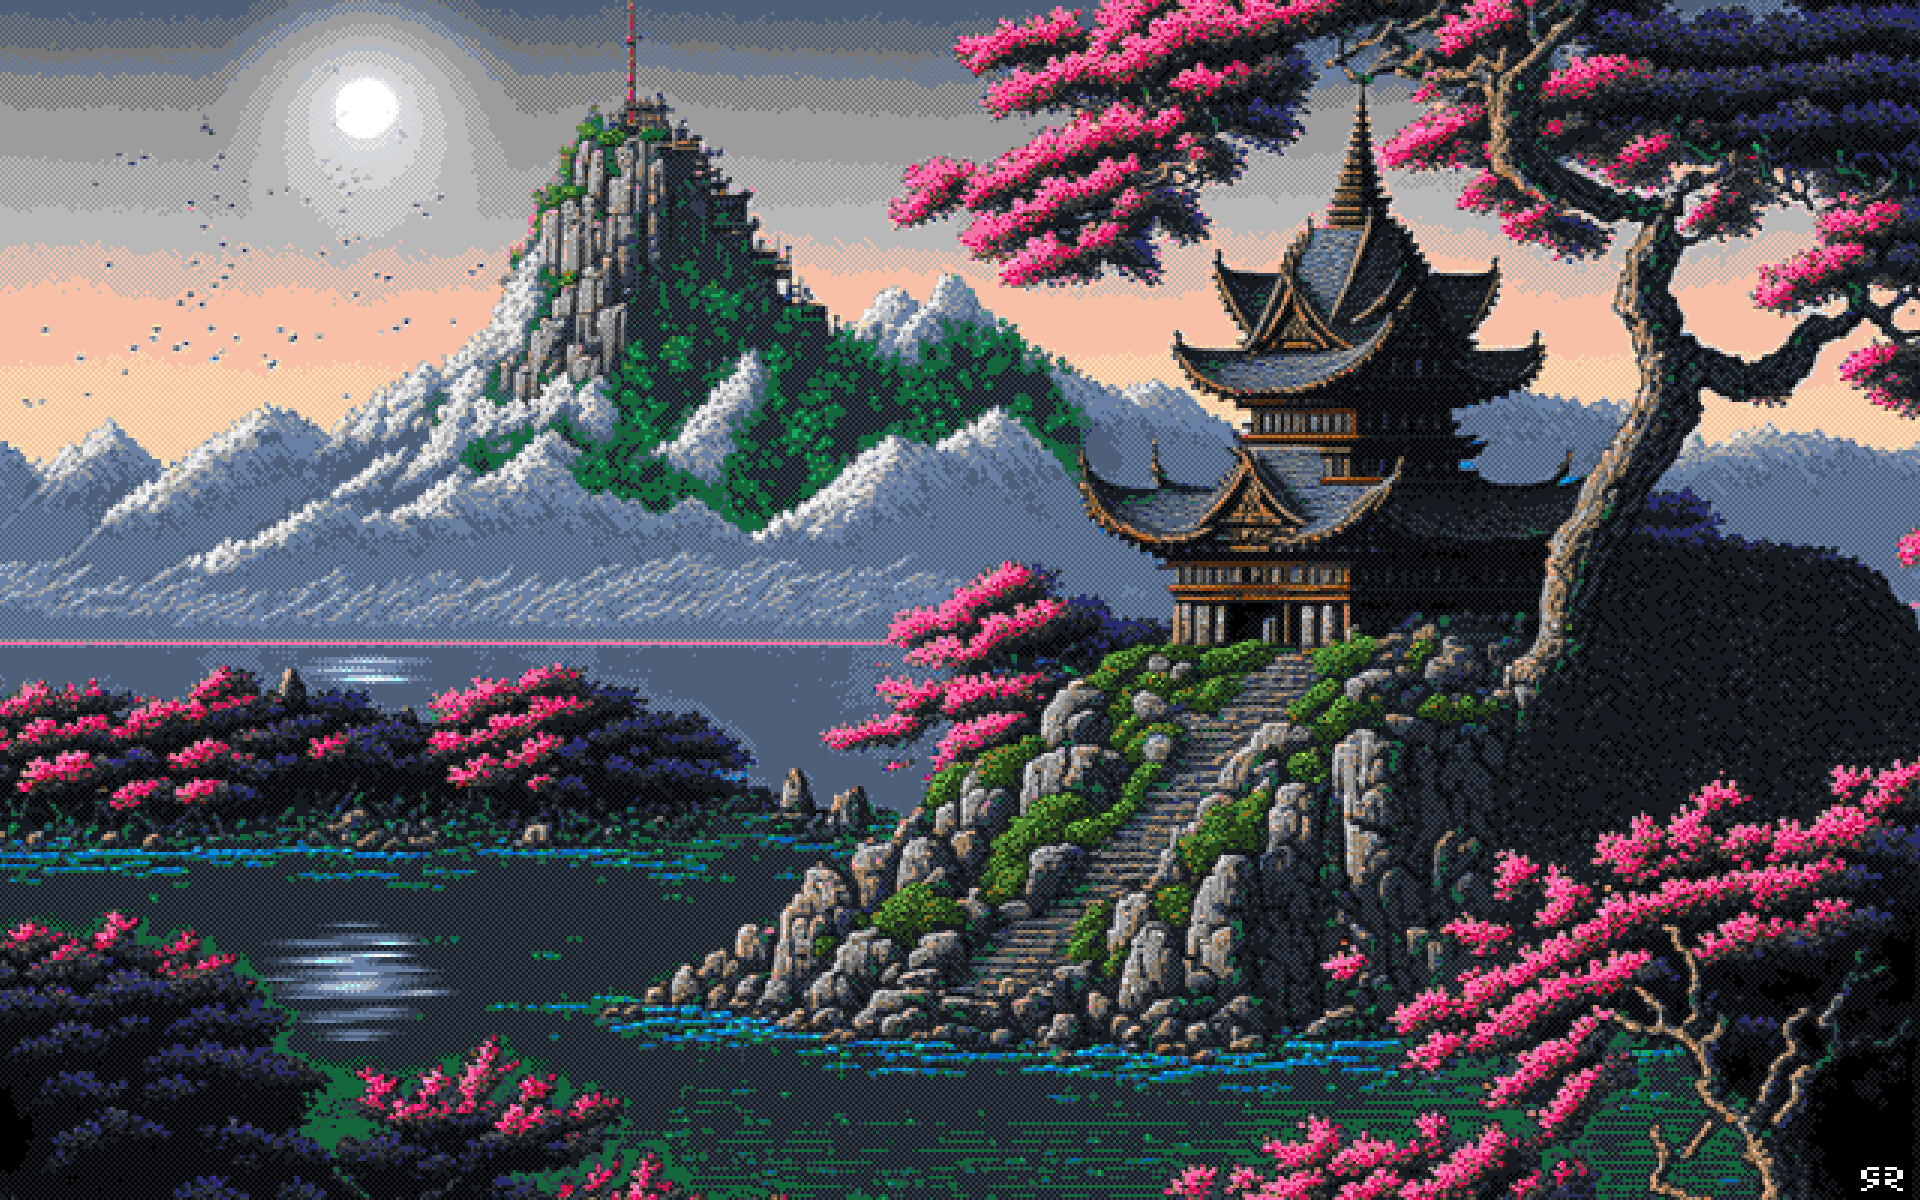 Pixel Art Building Trees Mountains Water Asian Architecture Pagoda Cherry Blossom Branch Stones Stai 1920x1200